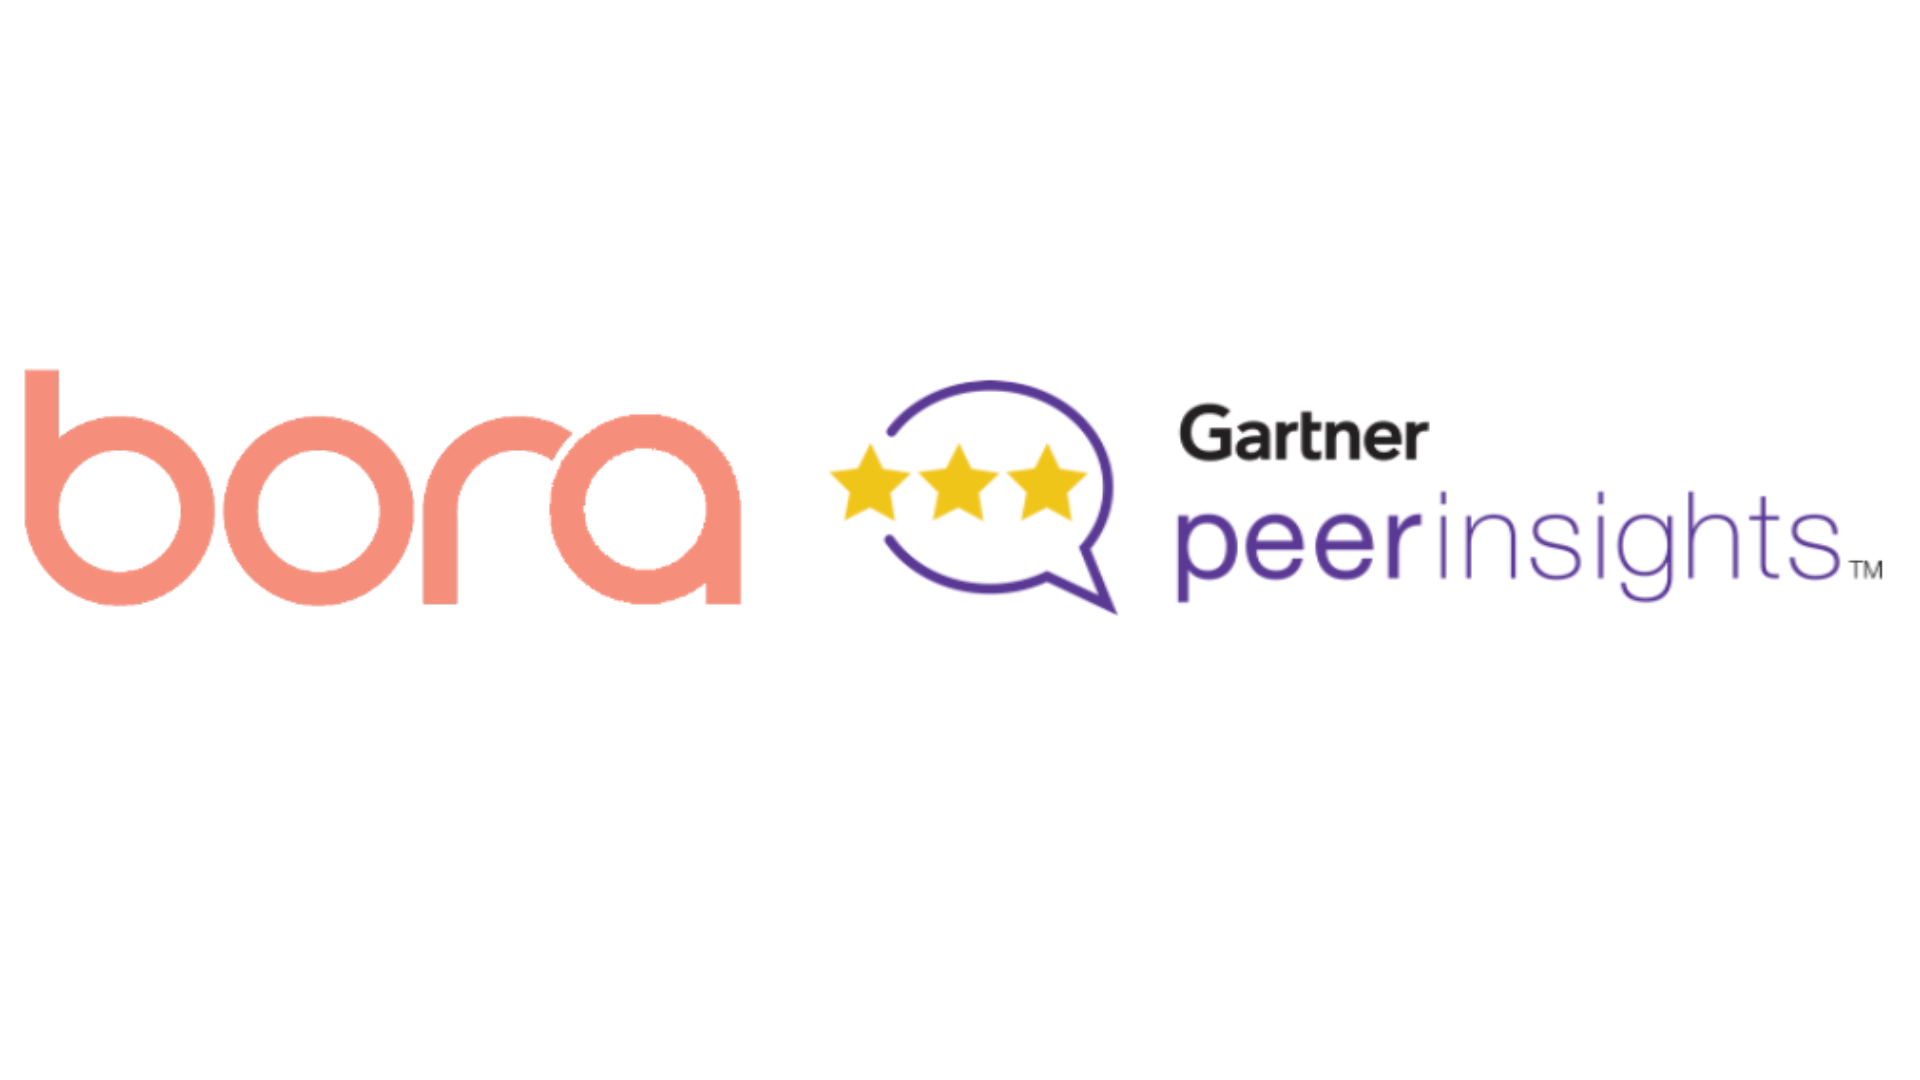 Why use advocacy strategy on tech review site Gartner Peer Insights?